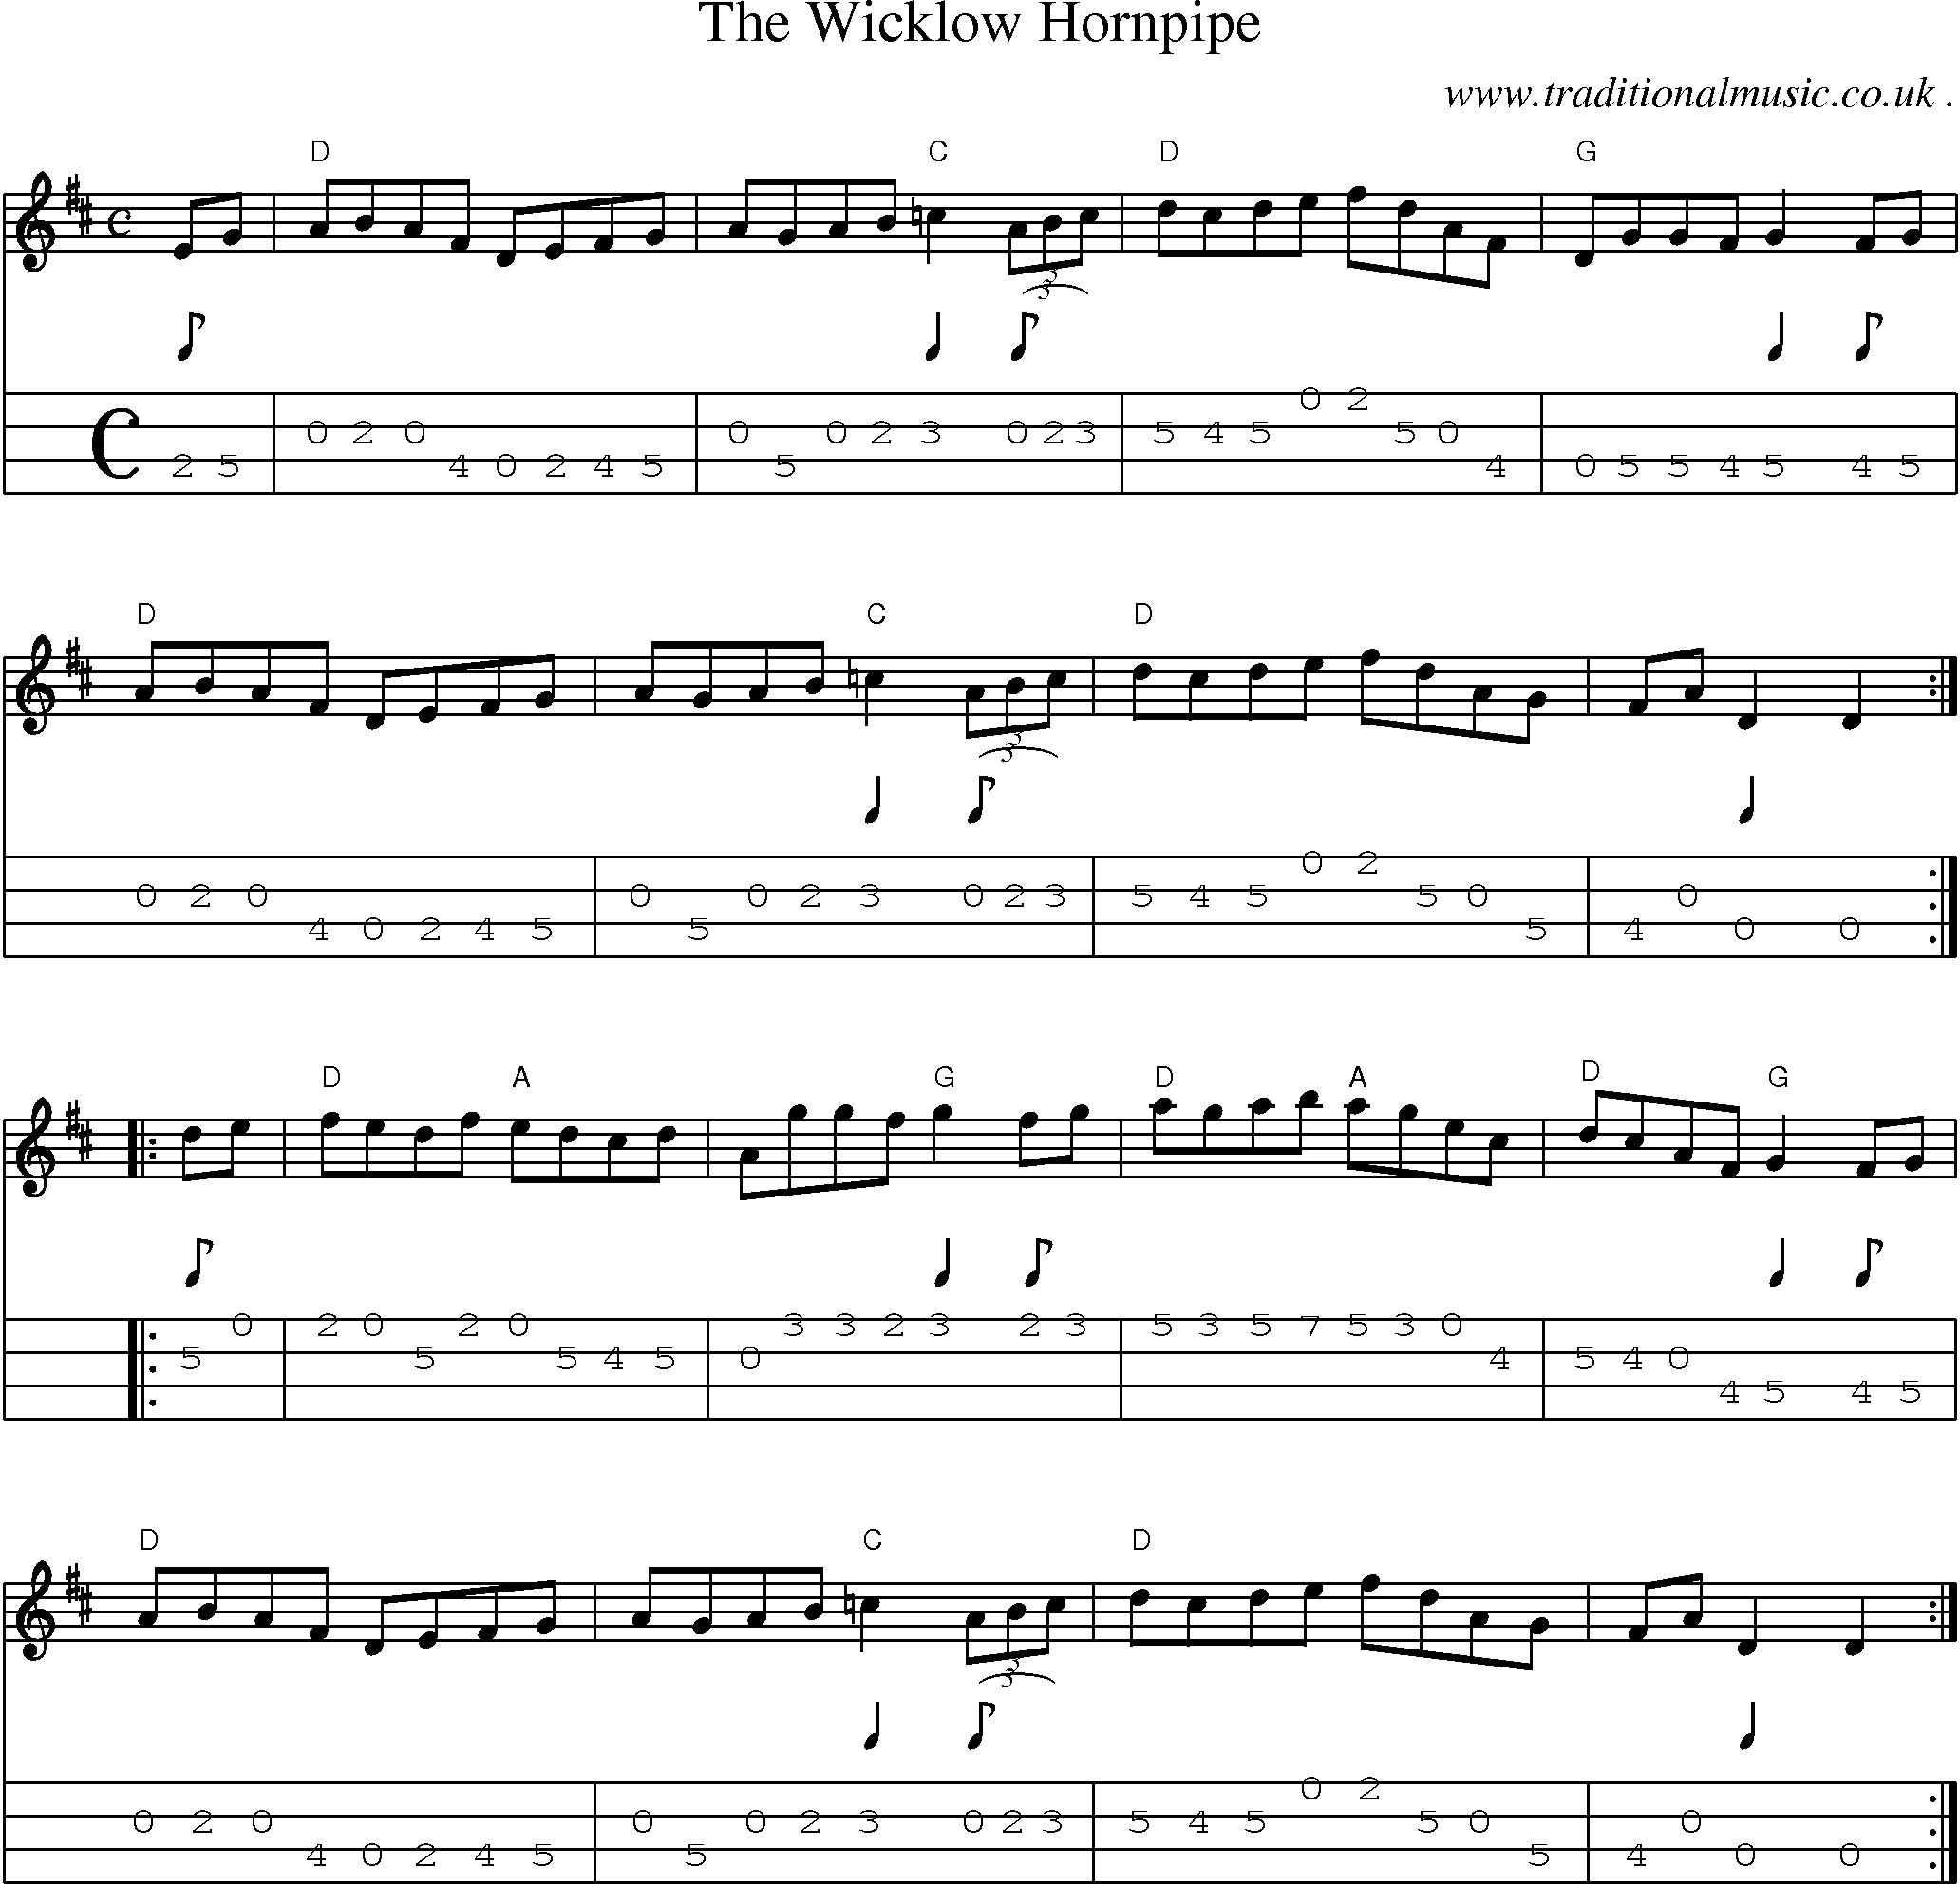 Music Score and Guitar Tabs for The Wicklow Hornpipe